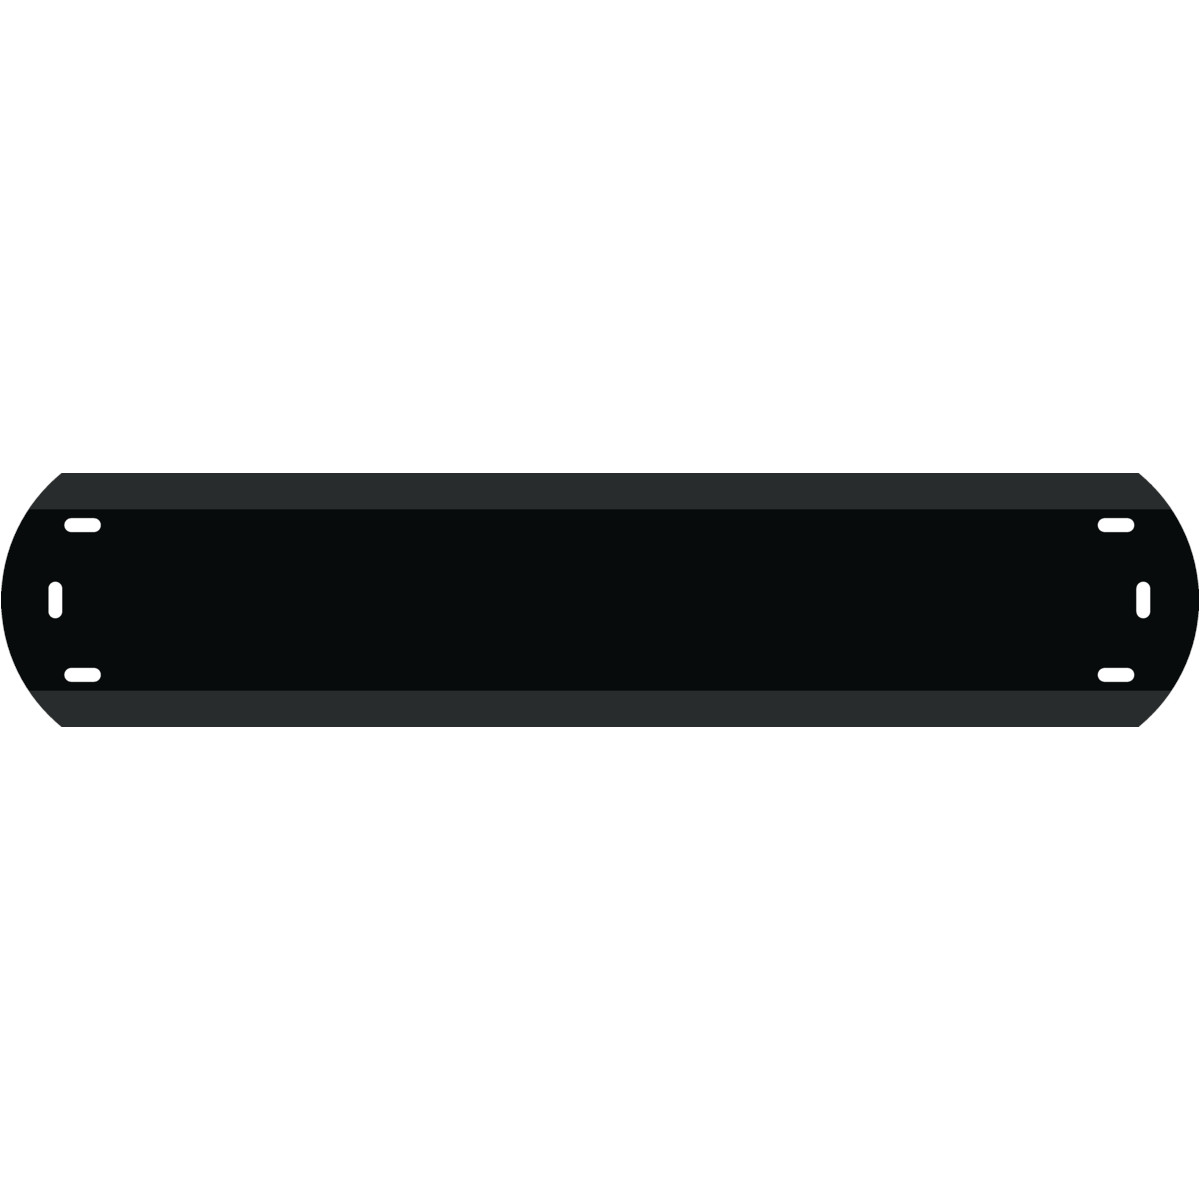 1" Character Polyethylene Holder - Fits 7 Characters